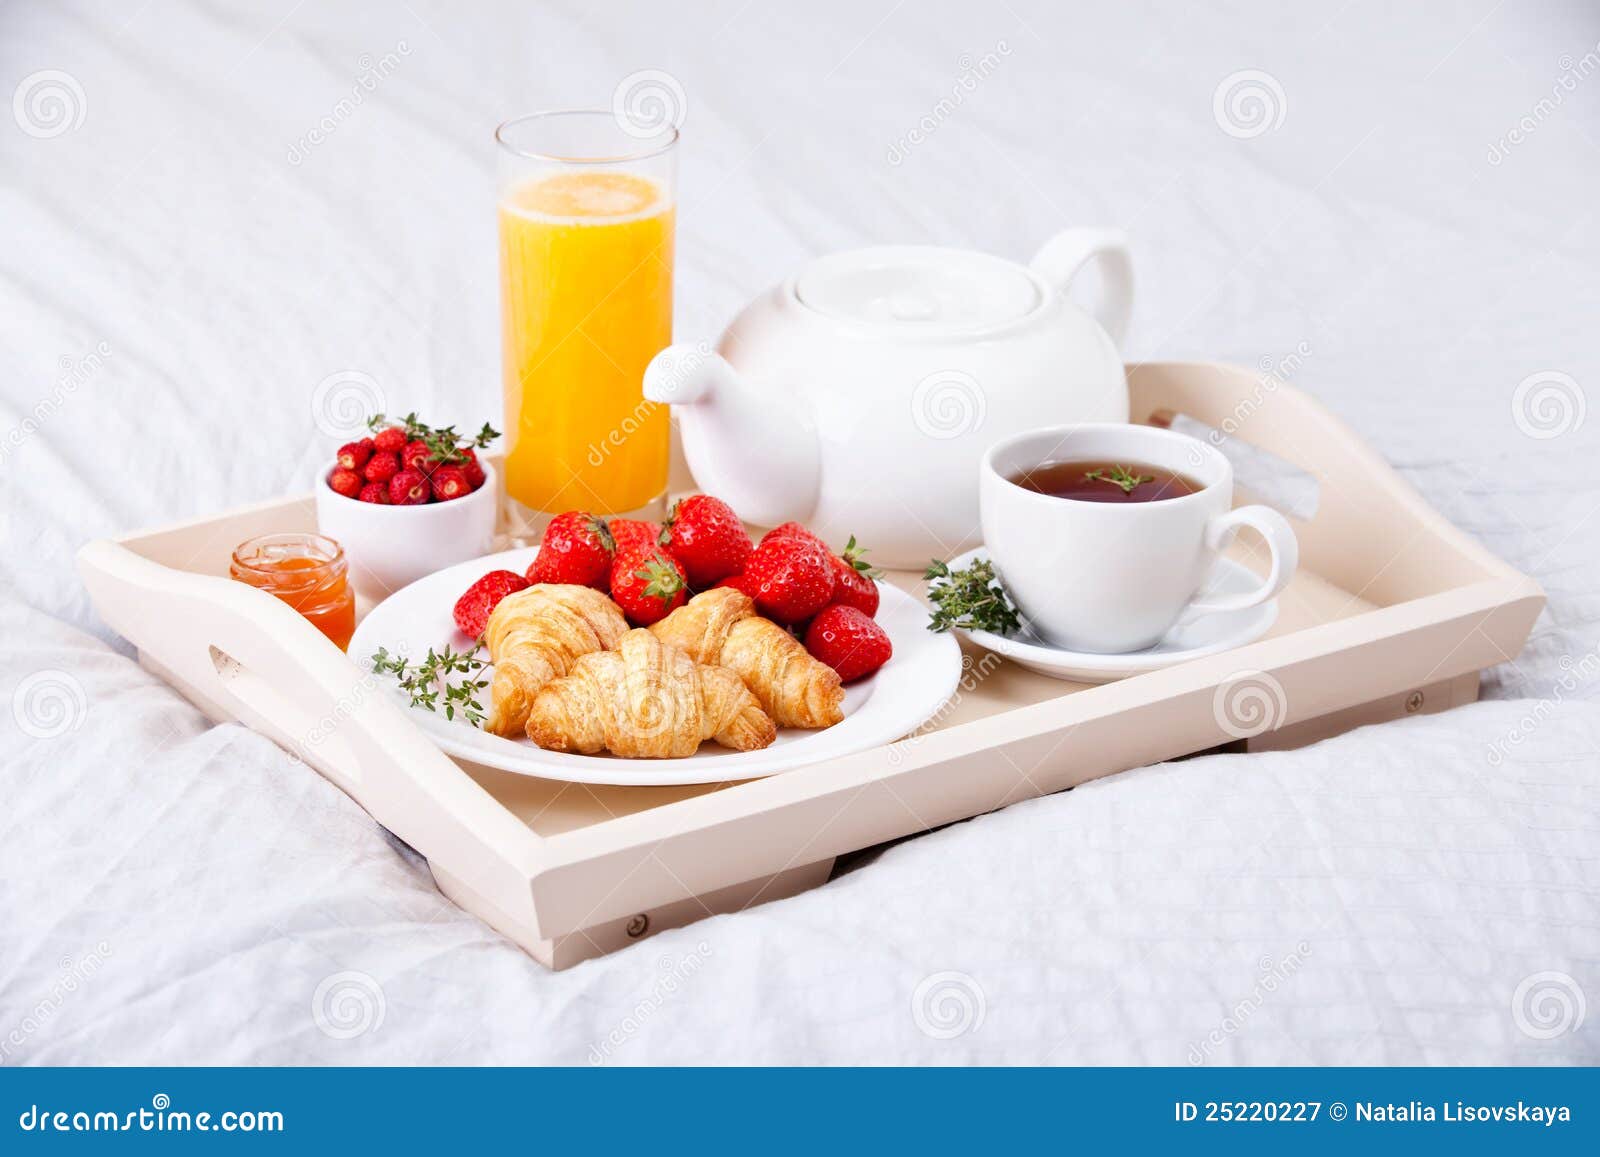 Breakfast In Bed Royalty Free Stock Photography - Image 